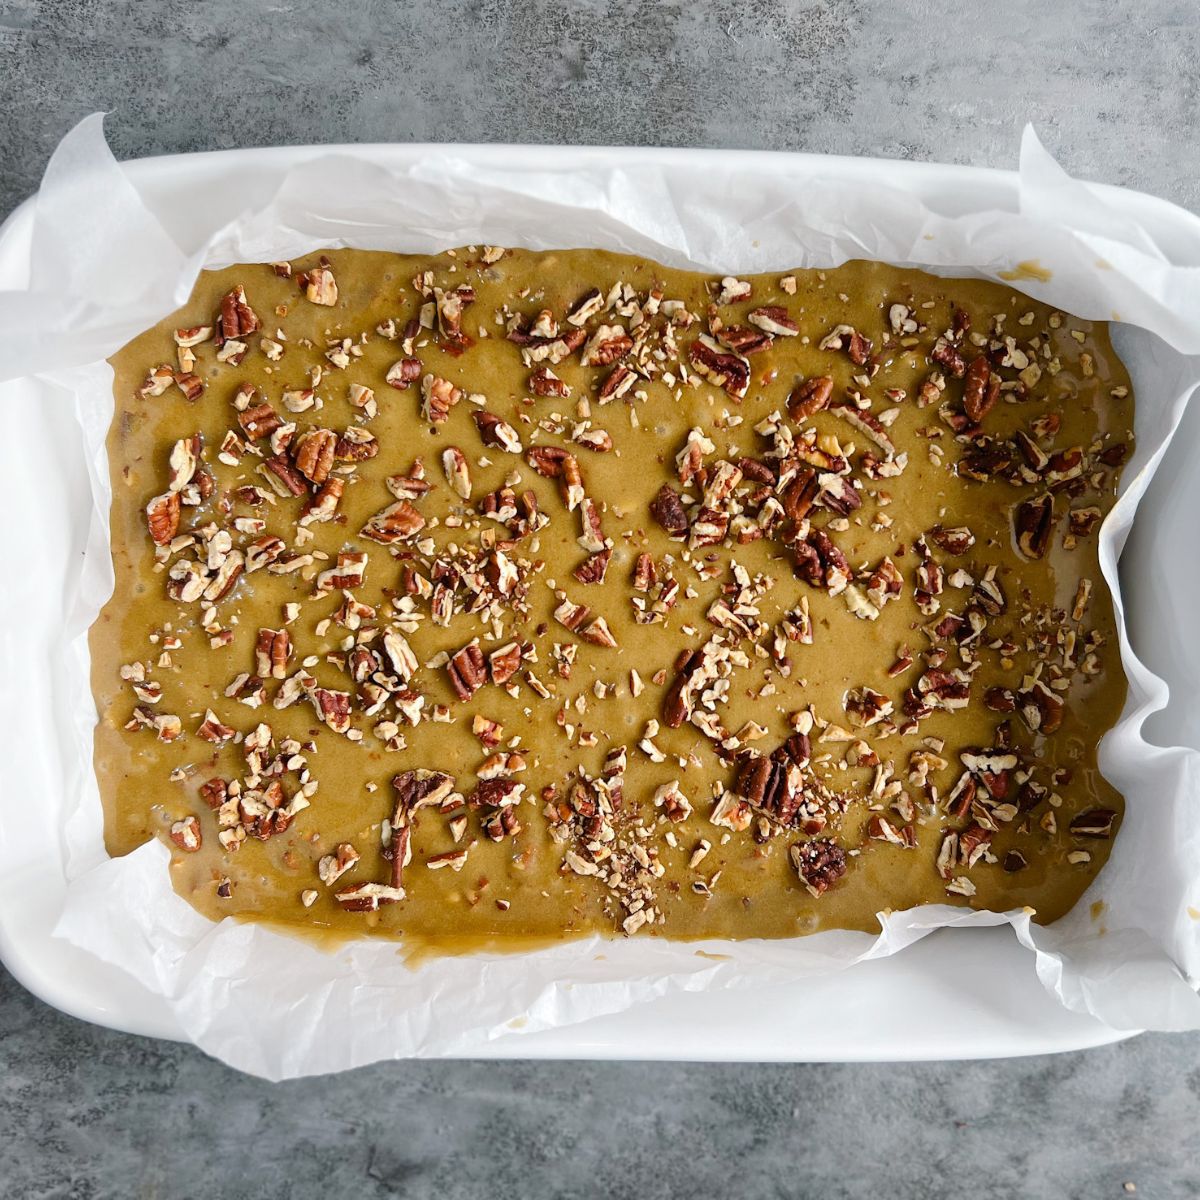 Blondie batter in a parchment paper covered 9x13 baking dish topped with chopped pecans.